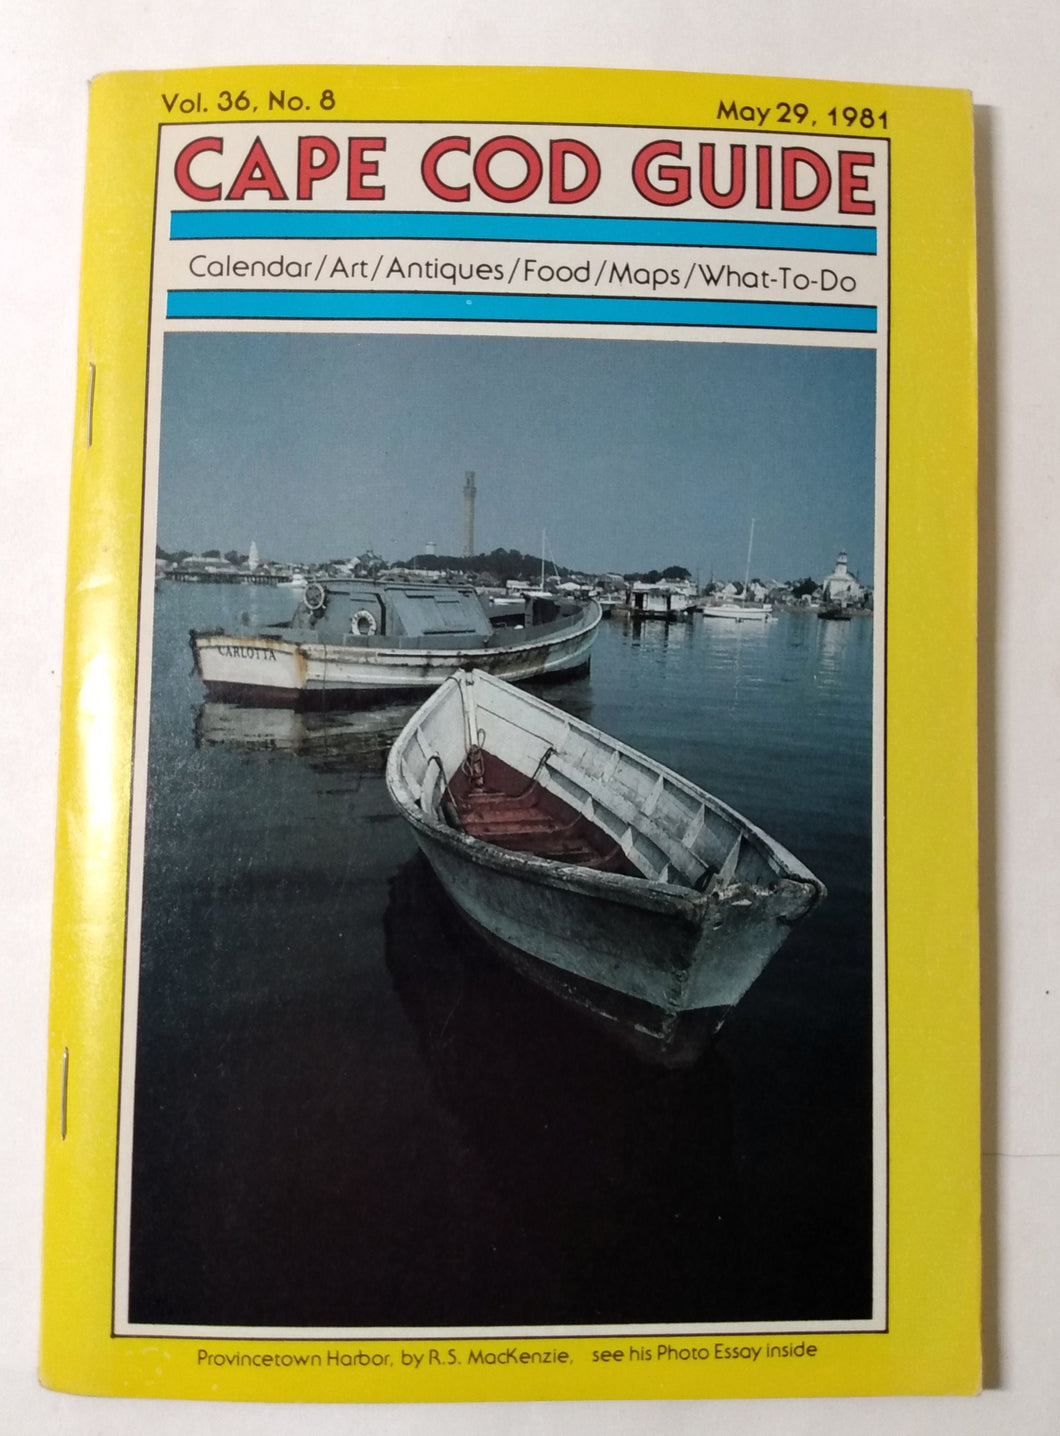 Cape Cod Guide May 29 1981 Calendar Art Food Antiques What-To-Do - TulipStuff